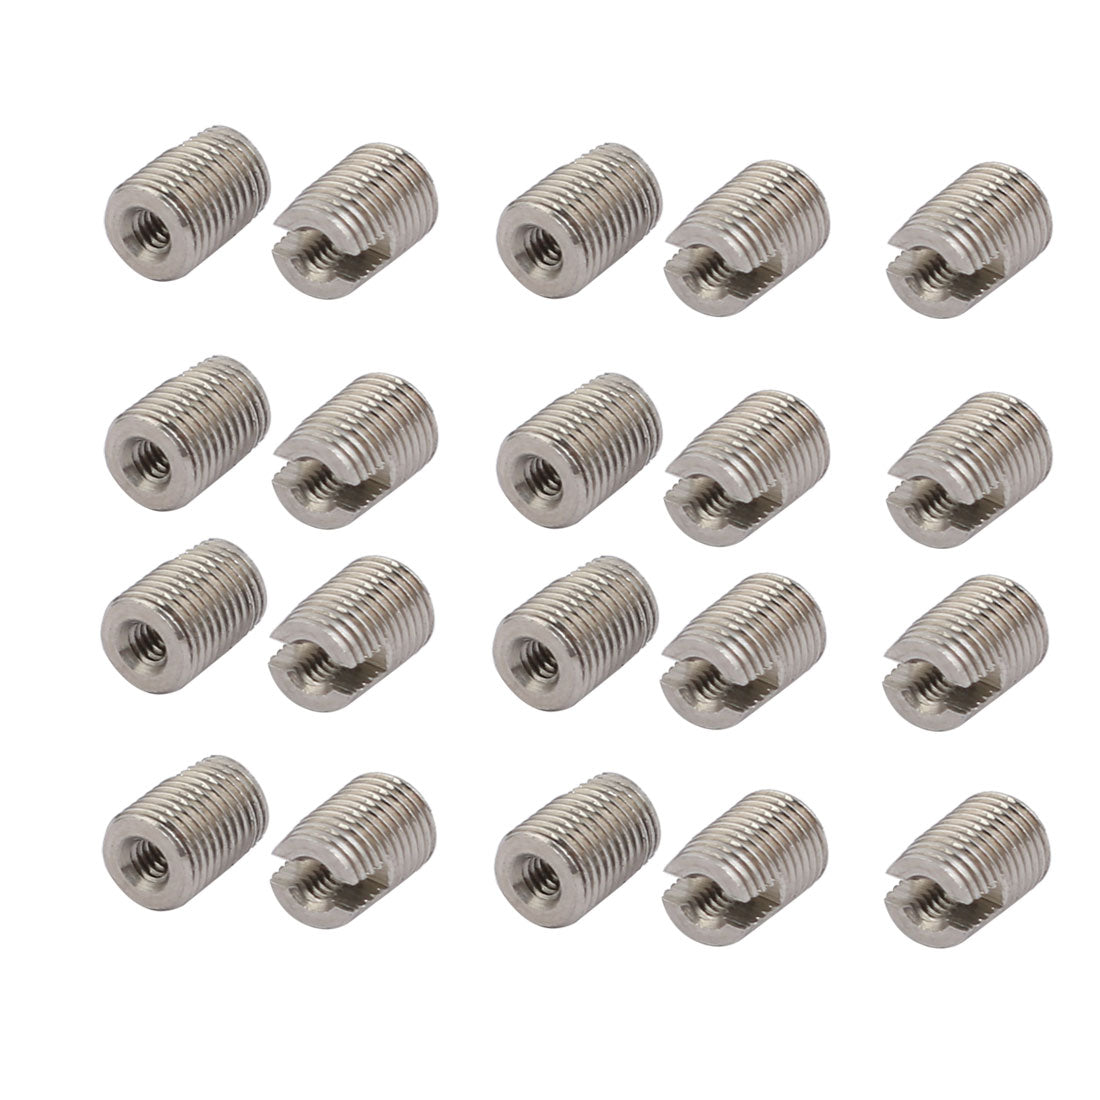 uxcell Uxcell M2x6mm 304 Stainless Steel Self Tapping Slotted Thread Insert 20pcs